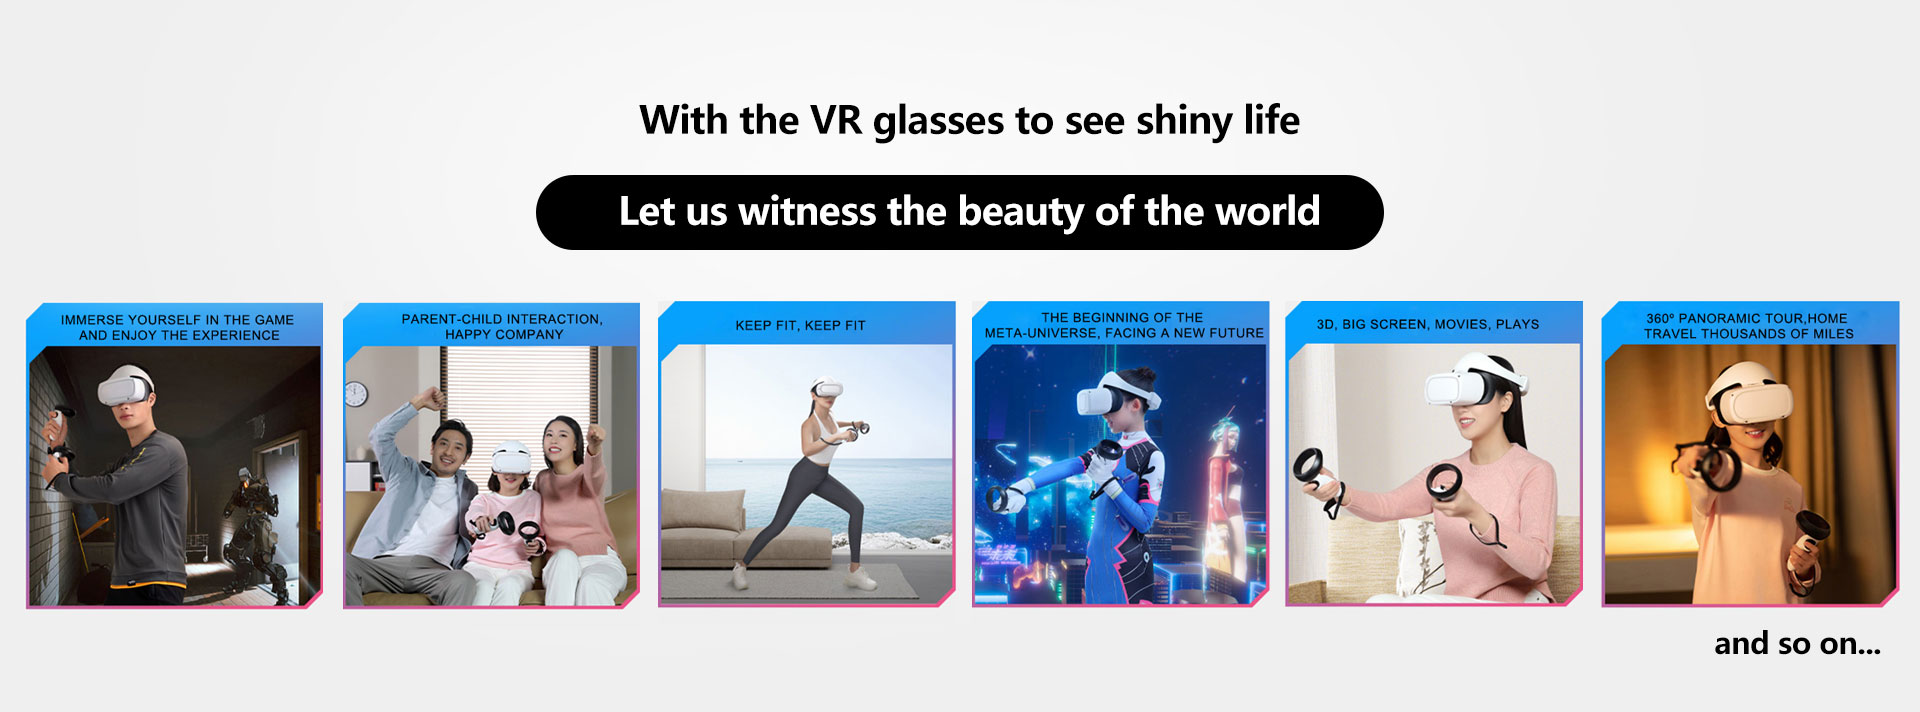 With the VR glasses to see shiny life Let us witness the beauty of the world